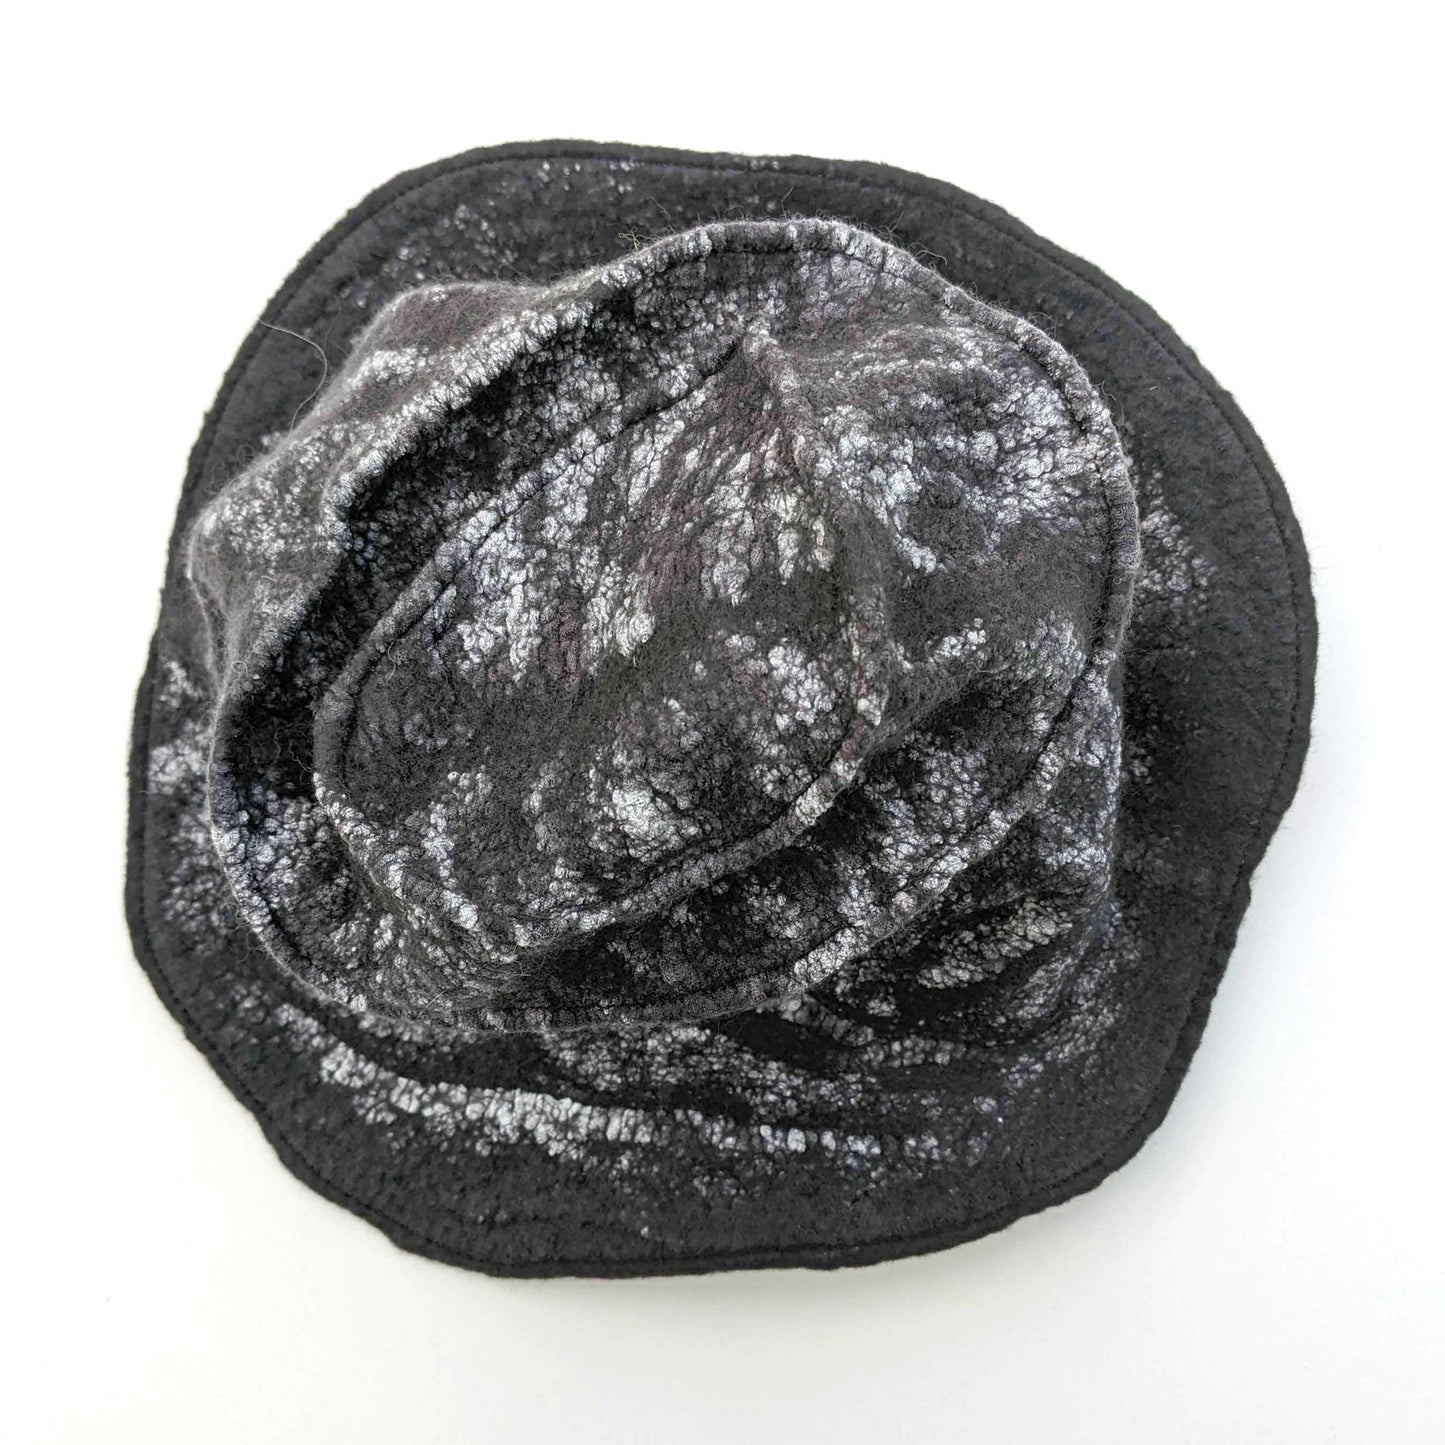 Black Nunofelted Western Style Hat - topview